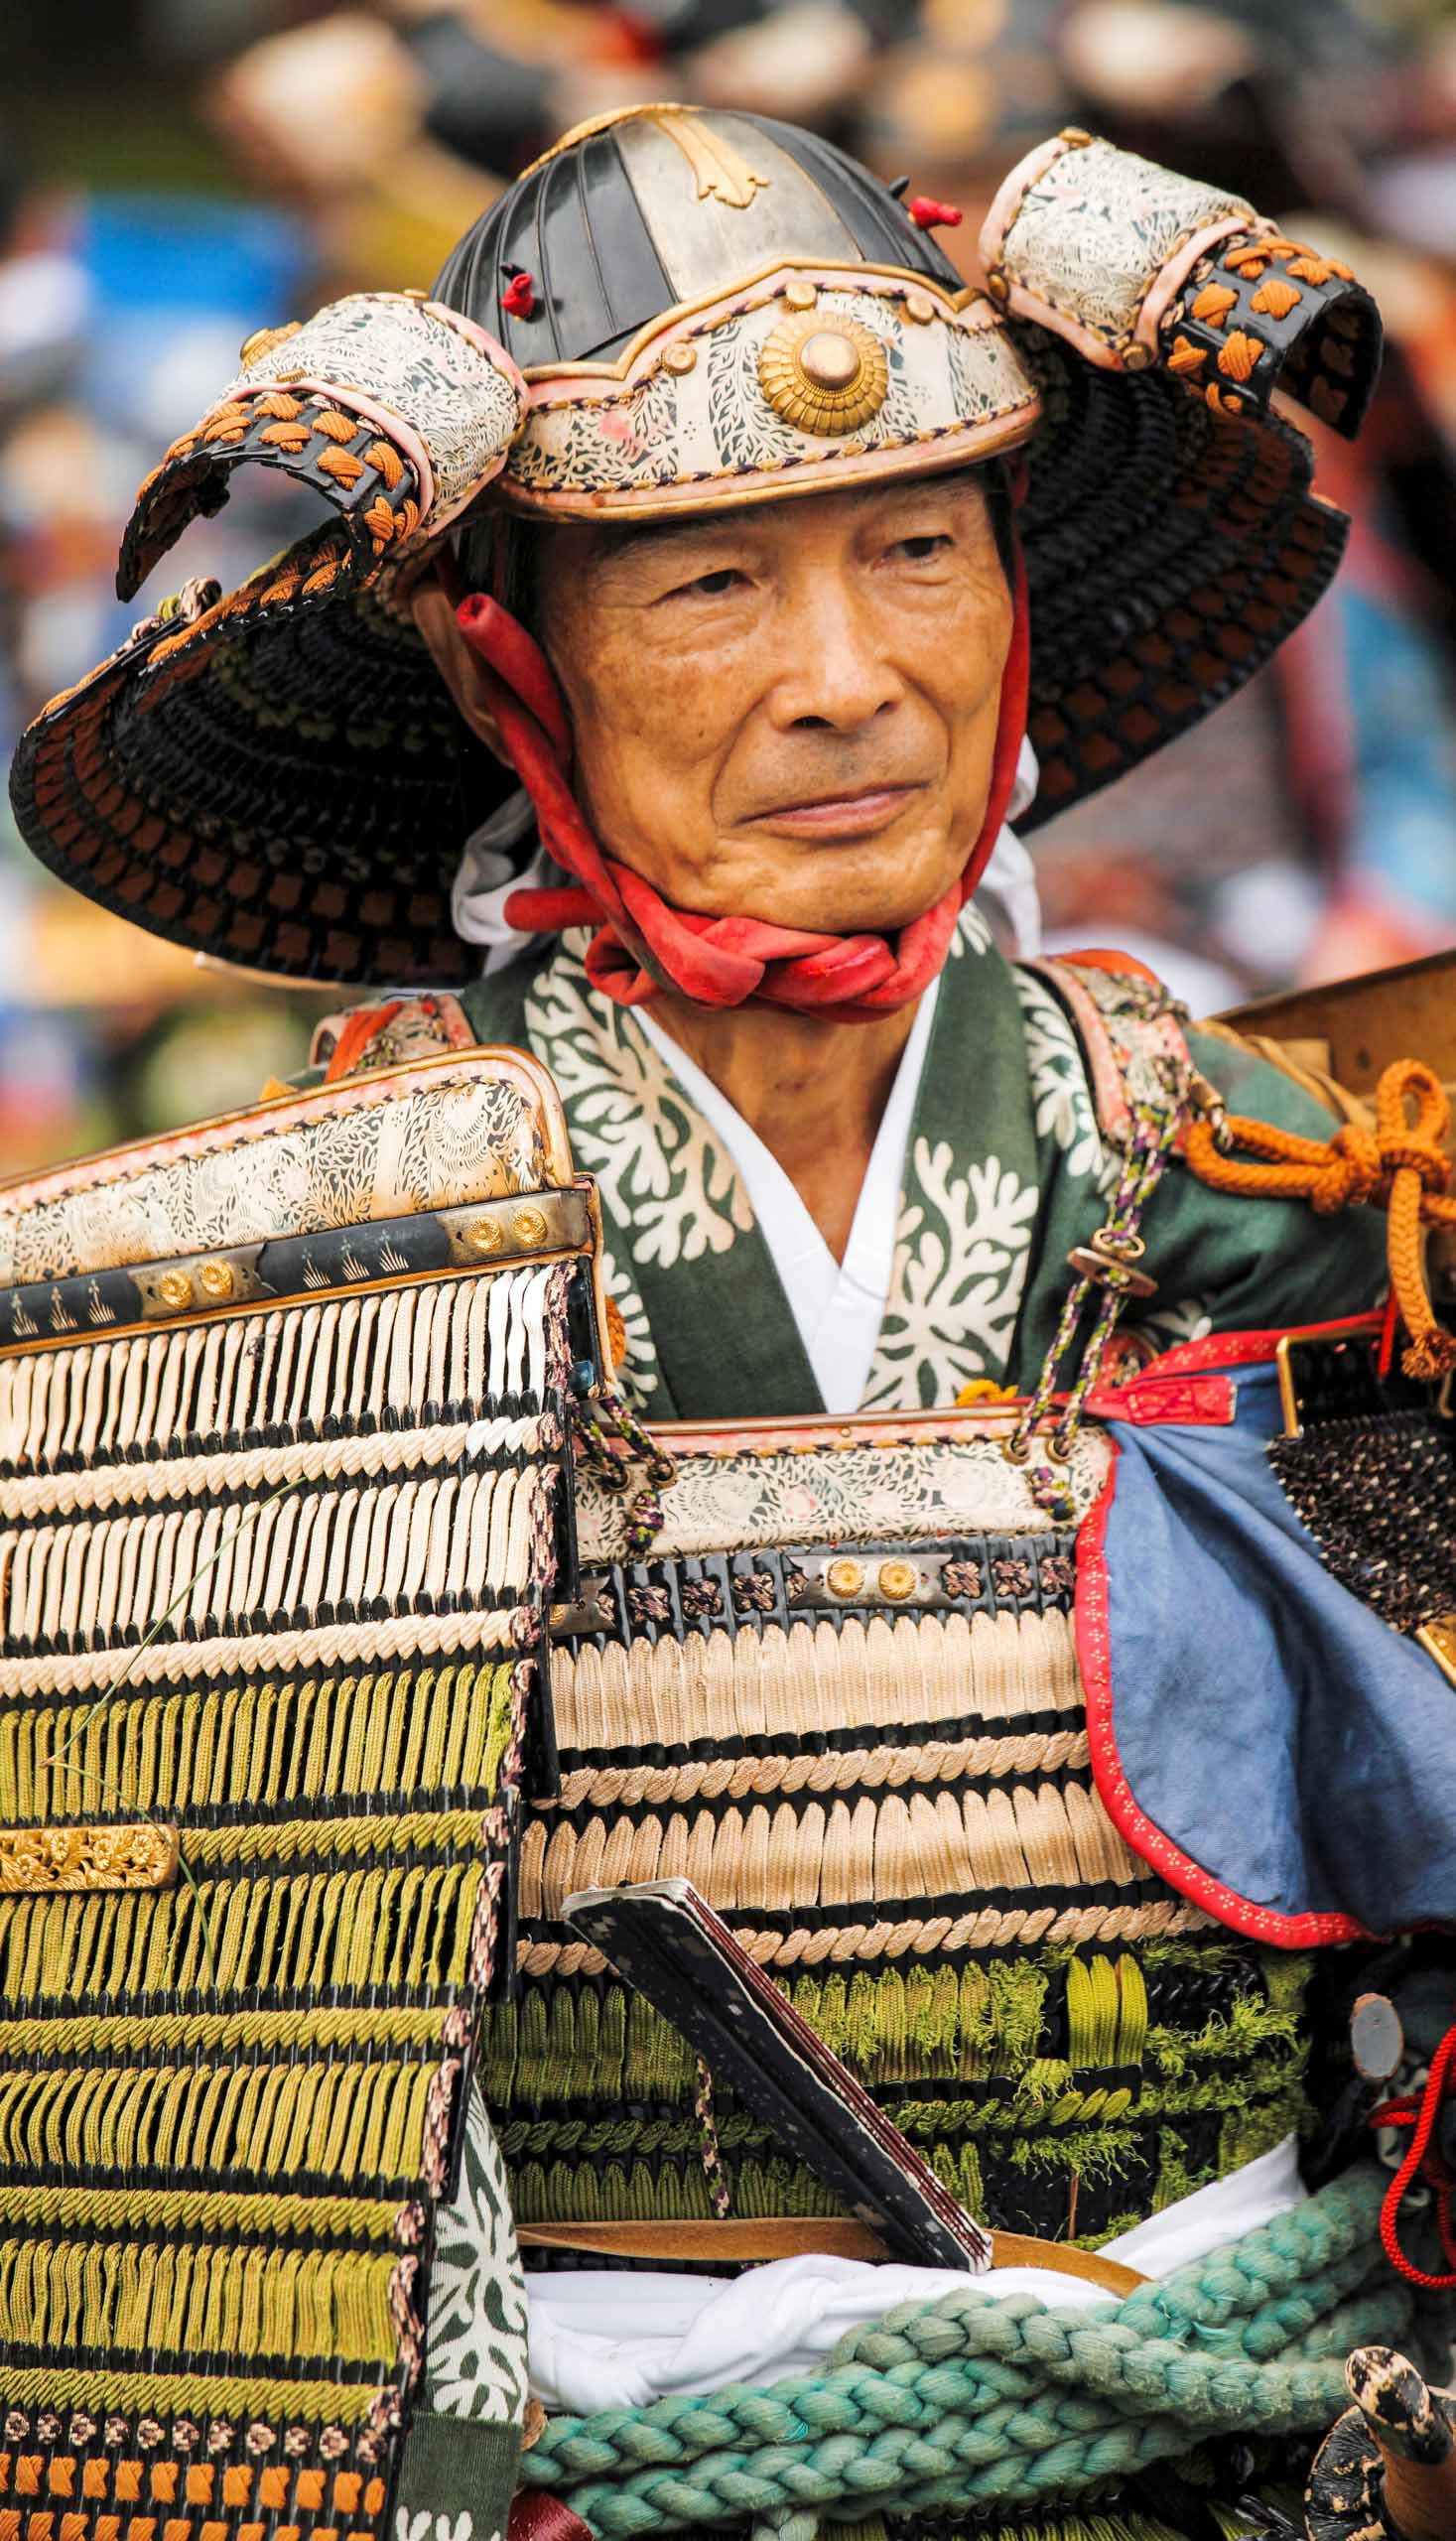 A man dressed in traditional wear for a festival in Japan.